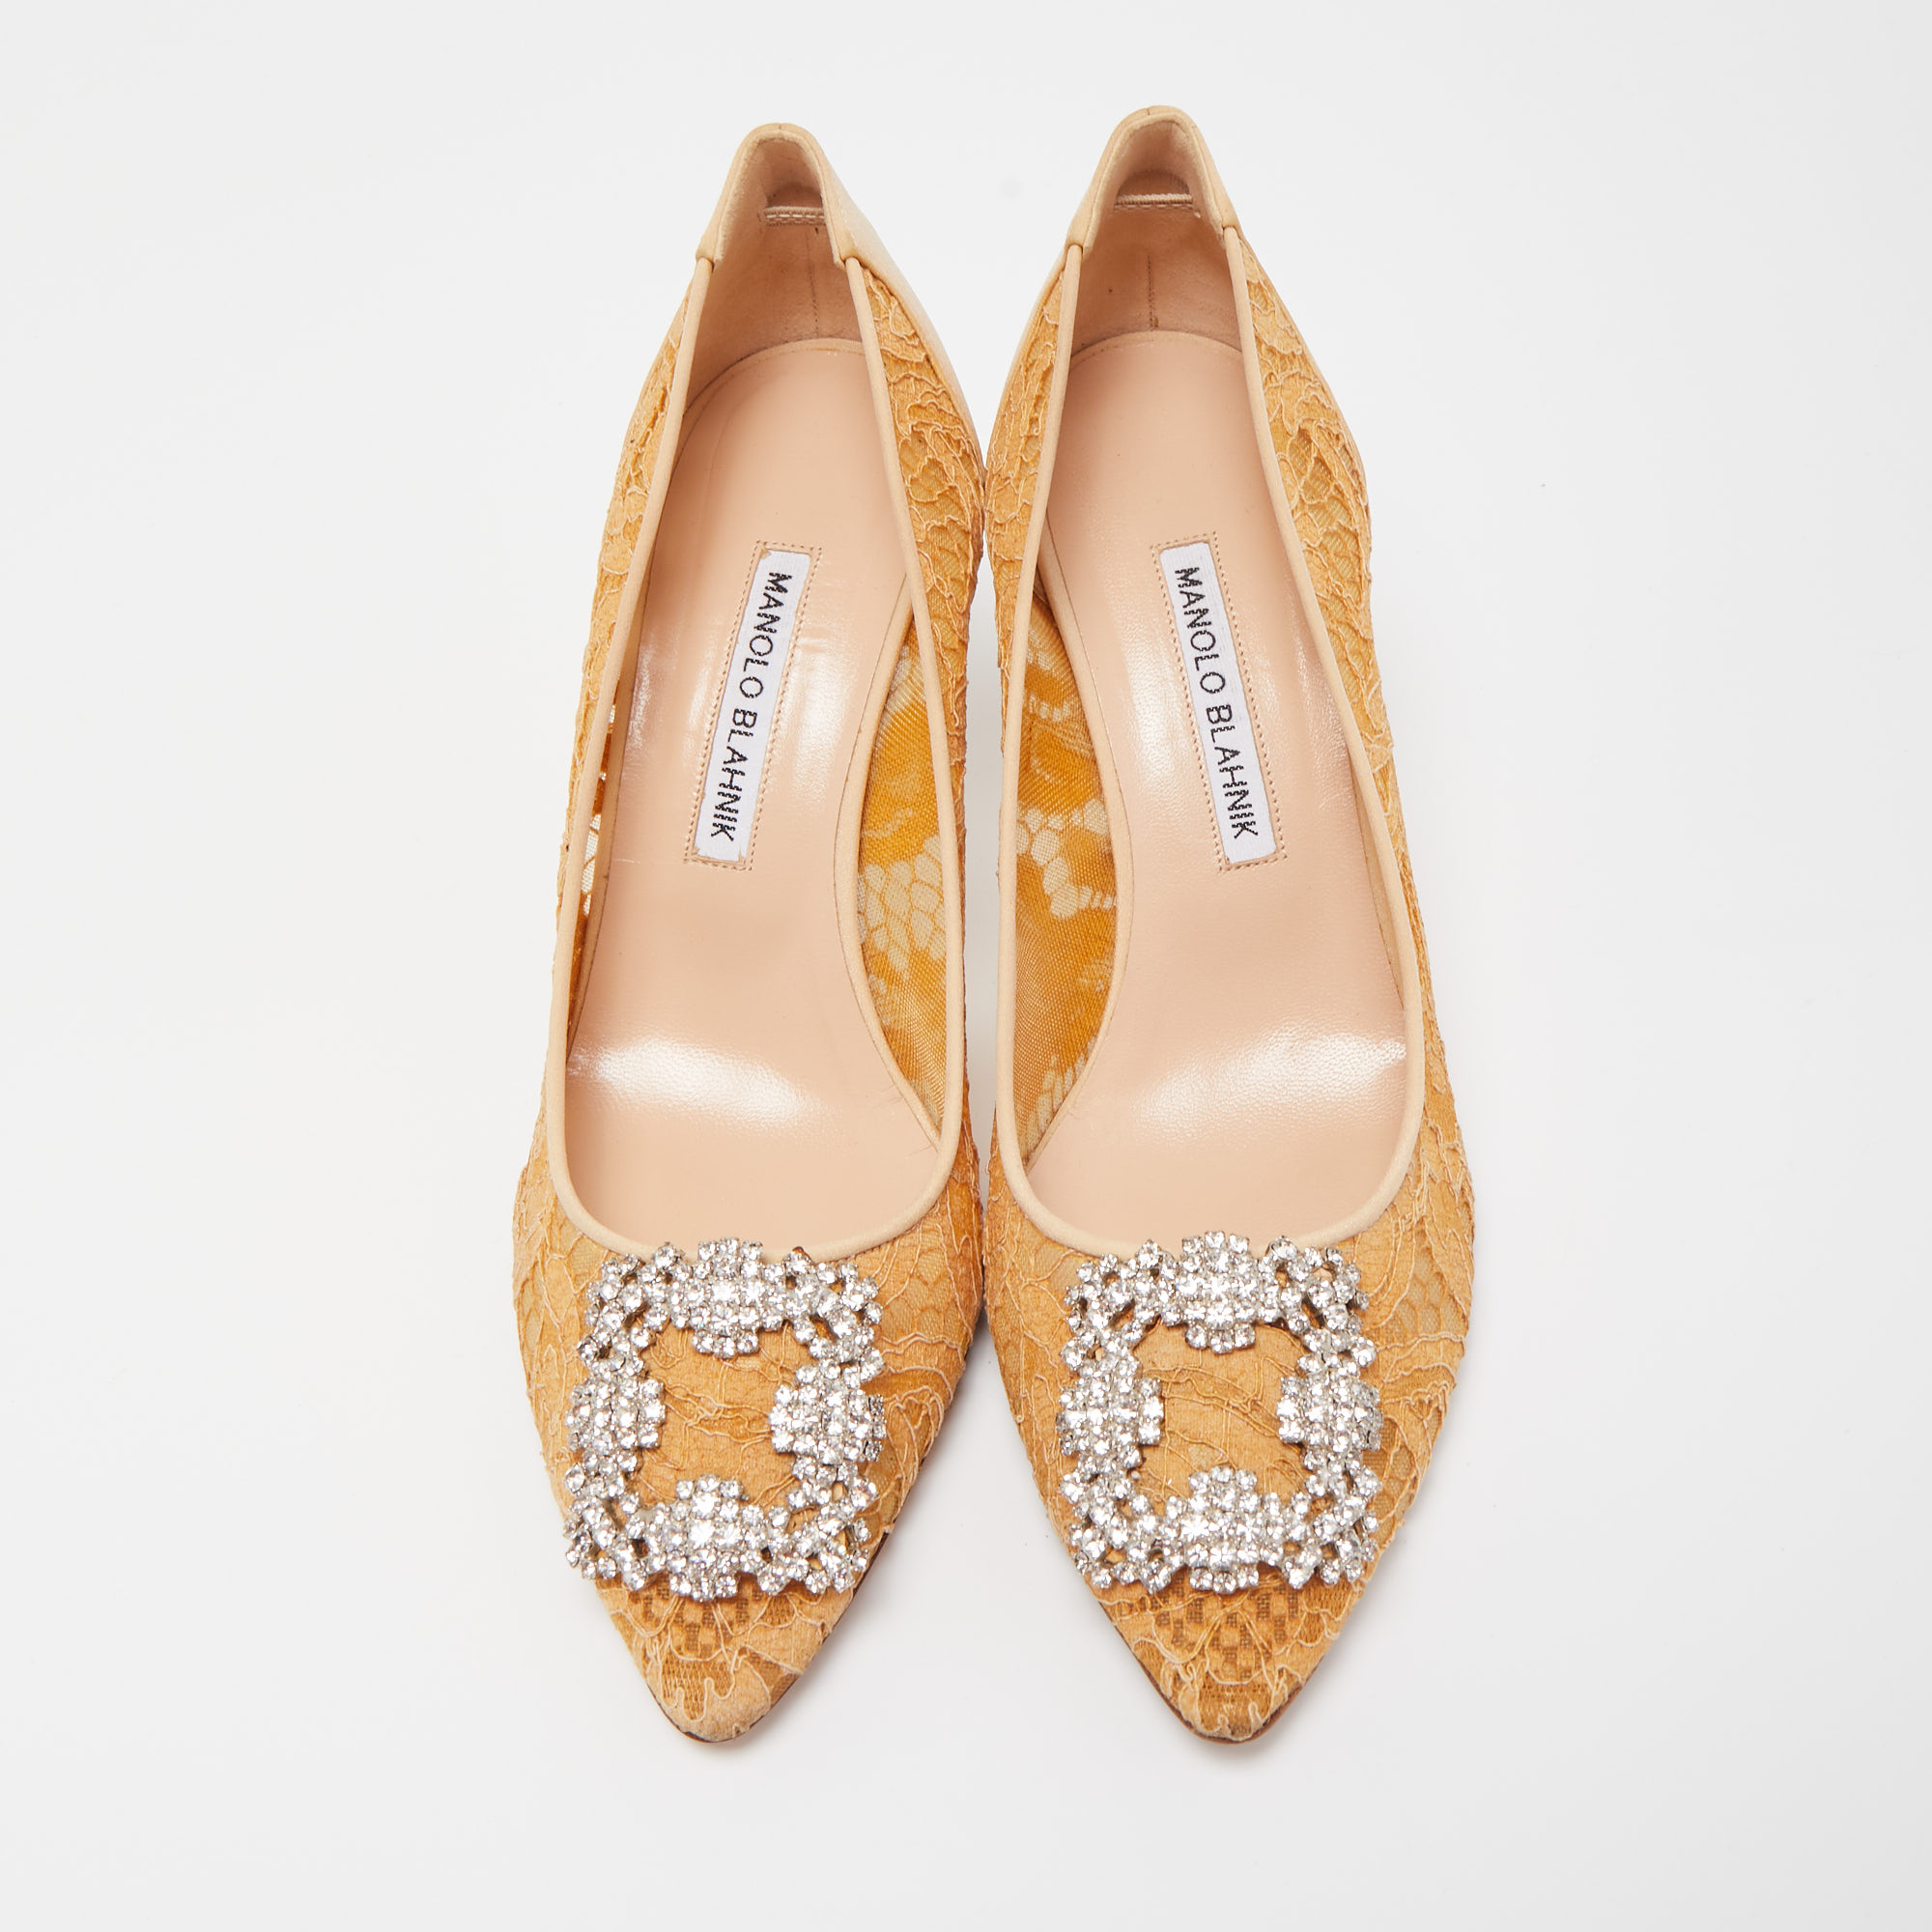 Manolo Blahnik Beige Lace And Satin Hangisi Crystal Embellished Pointed Toe Pumps Size 39.5